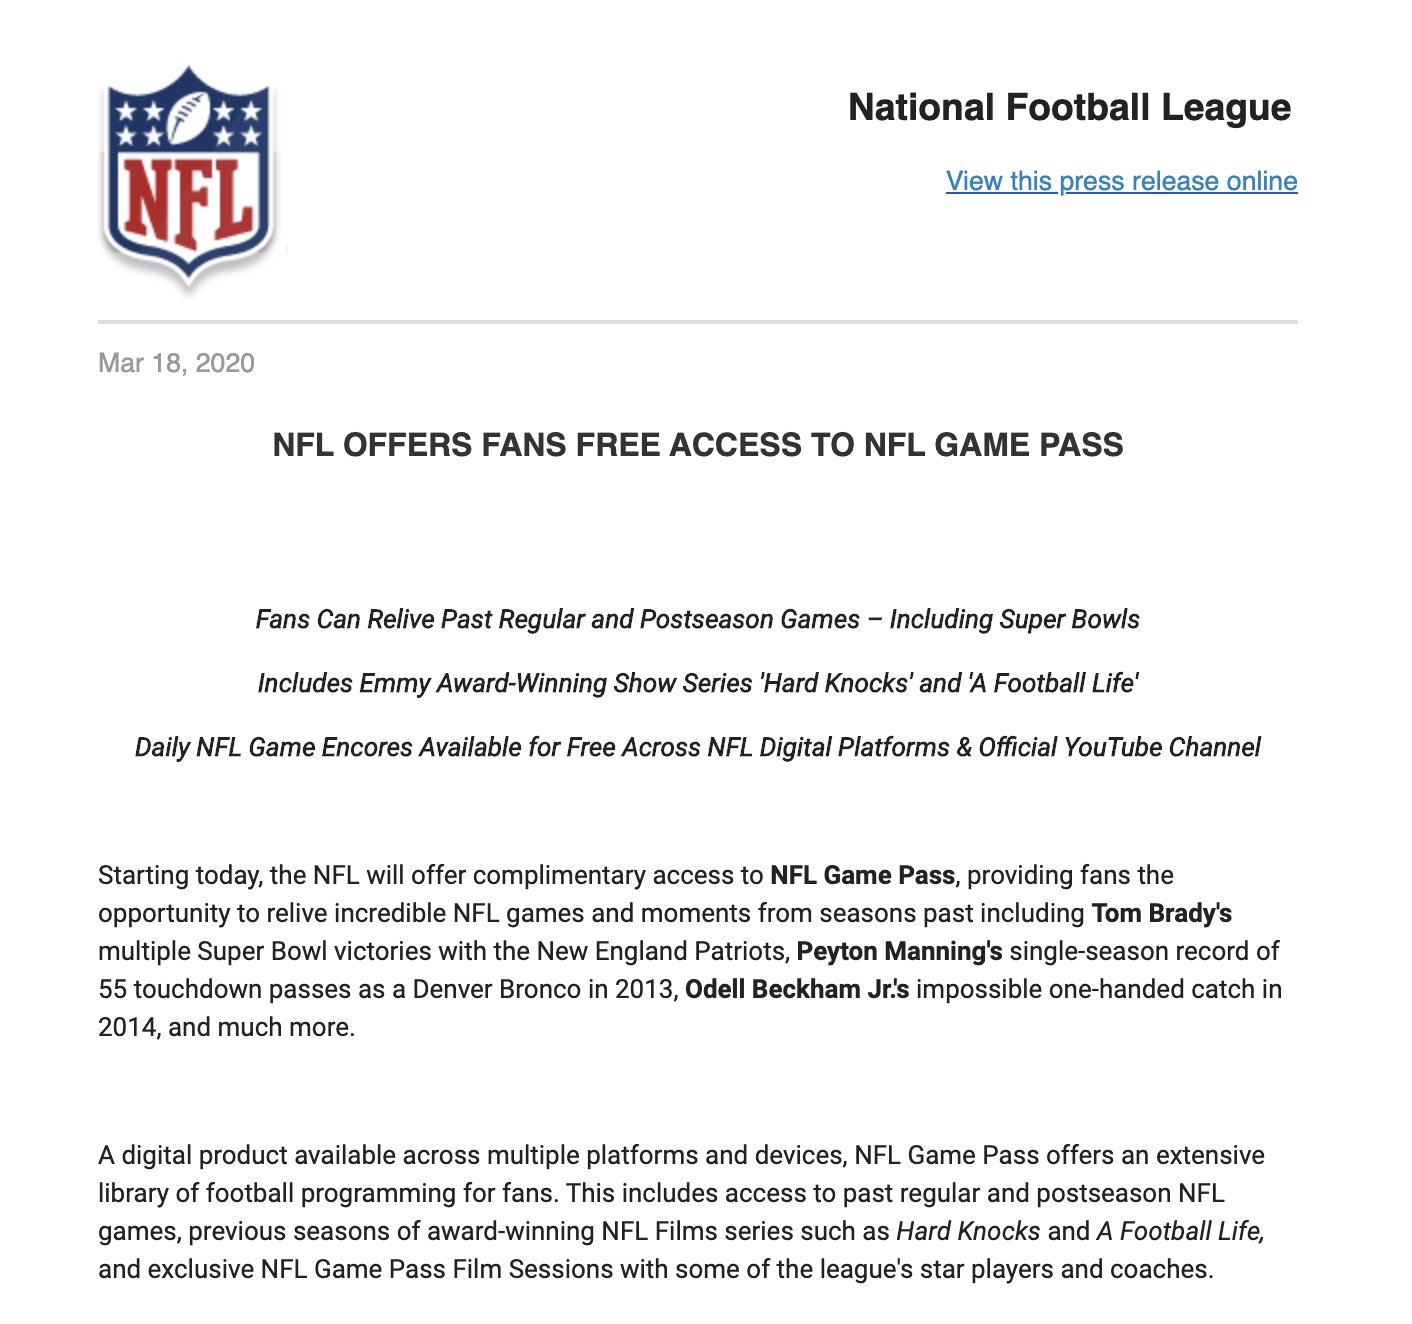 The NFL is Making Game Pass Available for Free - Crossing Broad